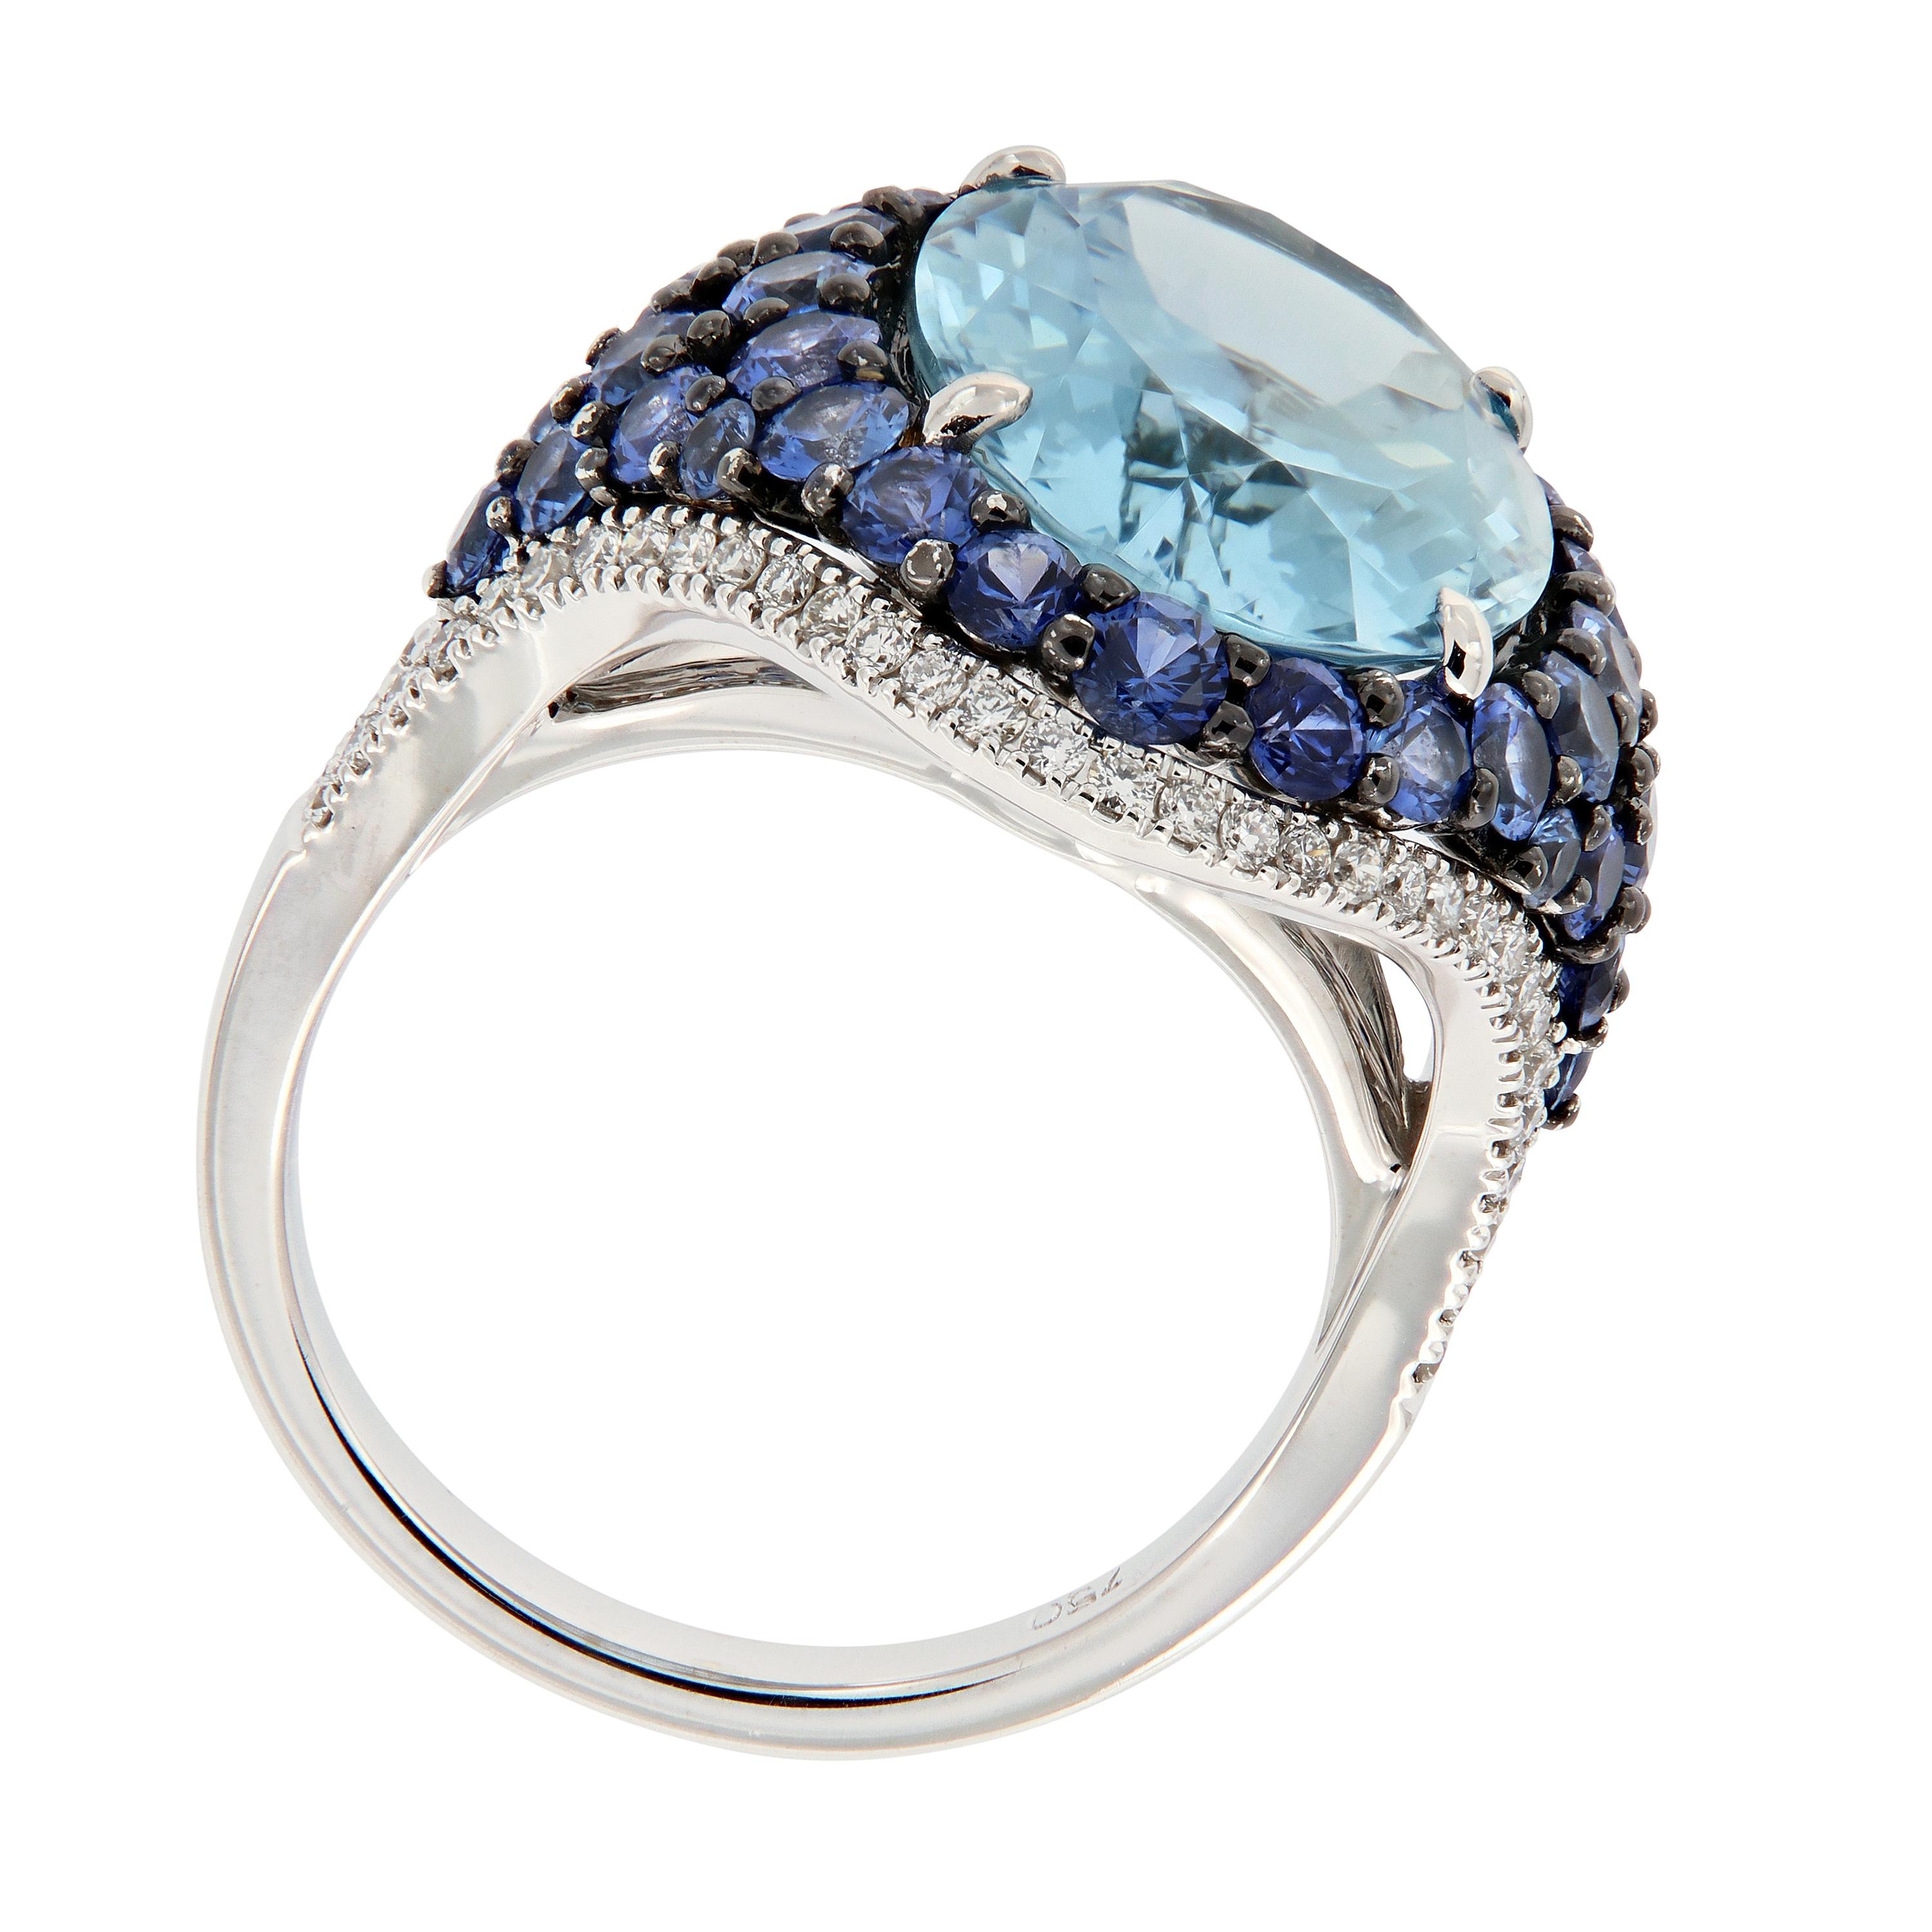 This stunning cocktail ring is beautiful combination of shades of blue! The ring centers around an oval aquamarine accented blue sapphires and diamonds. Weigh 9.9 grams. Ring size 6.25.

Aquamarine 6.72 ct
Blue Sapphires 2.19 cttw
Diamonds 0.39 cttw